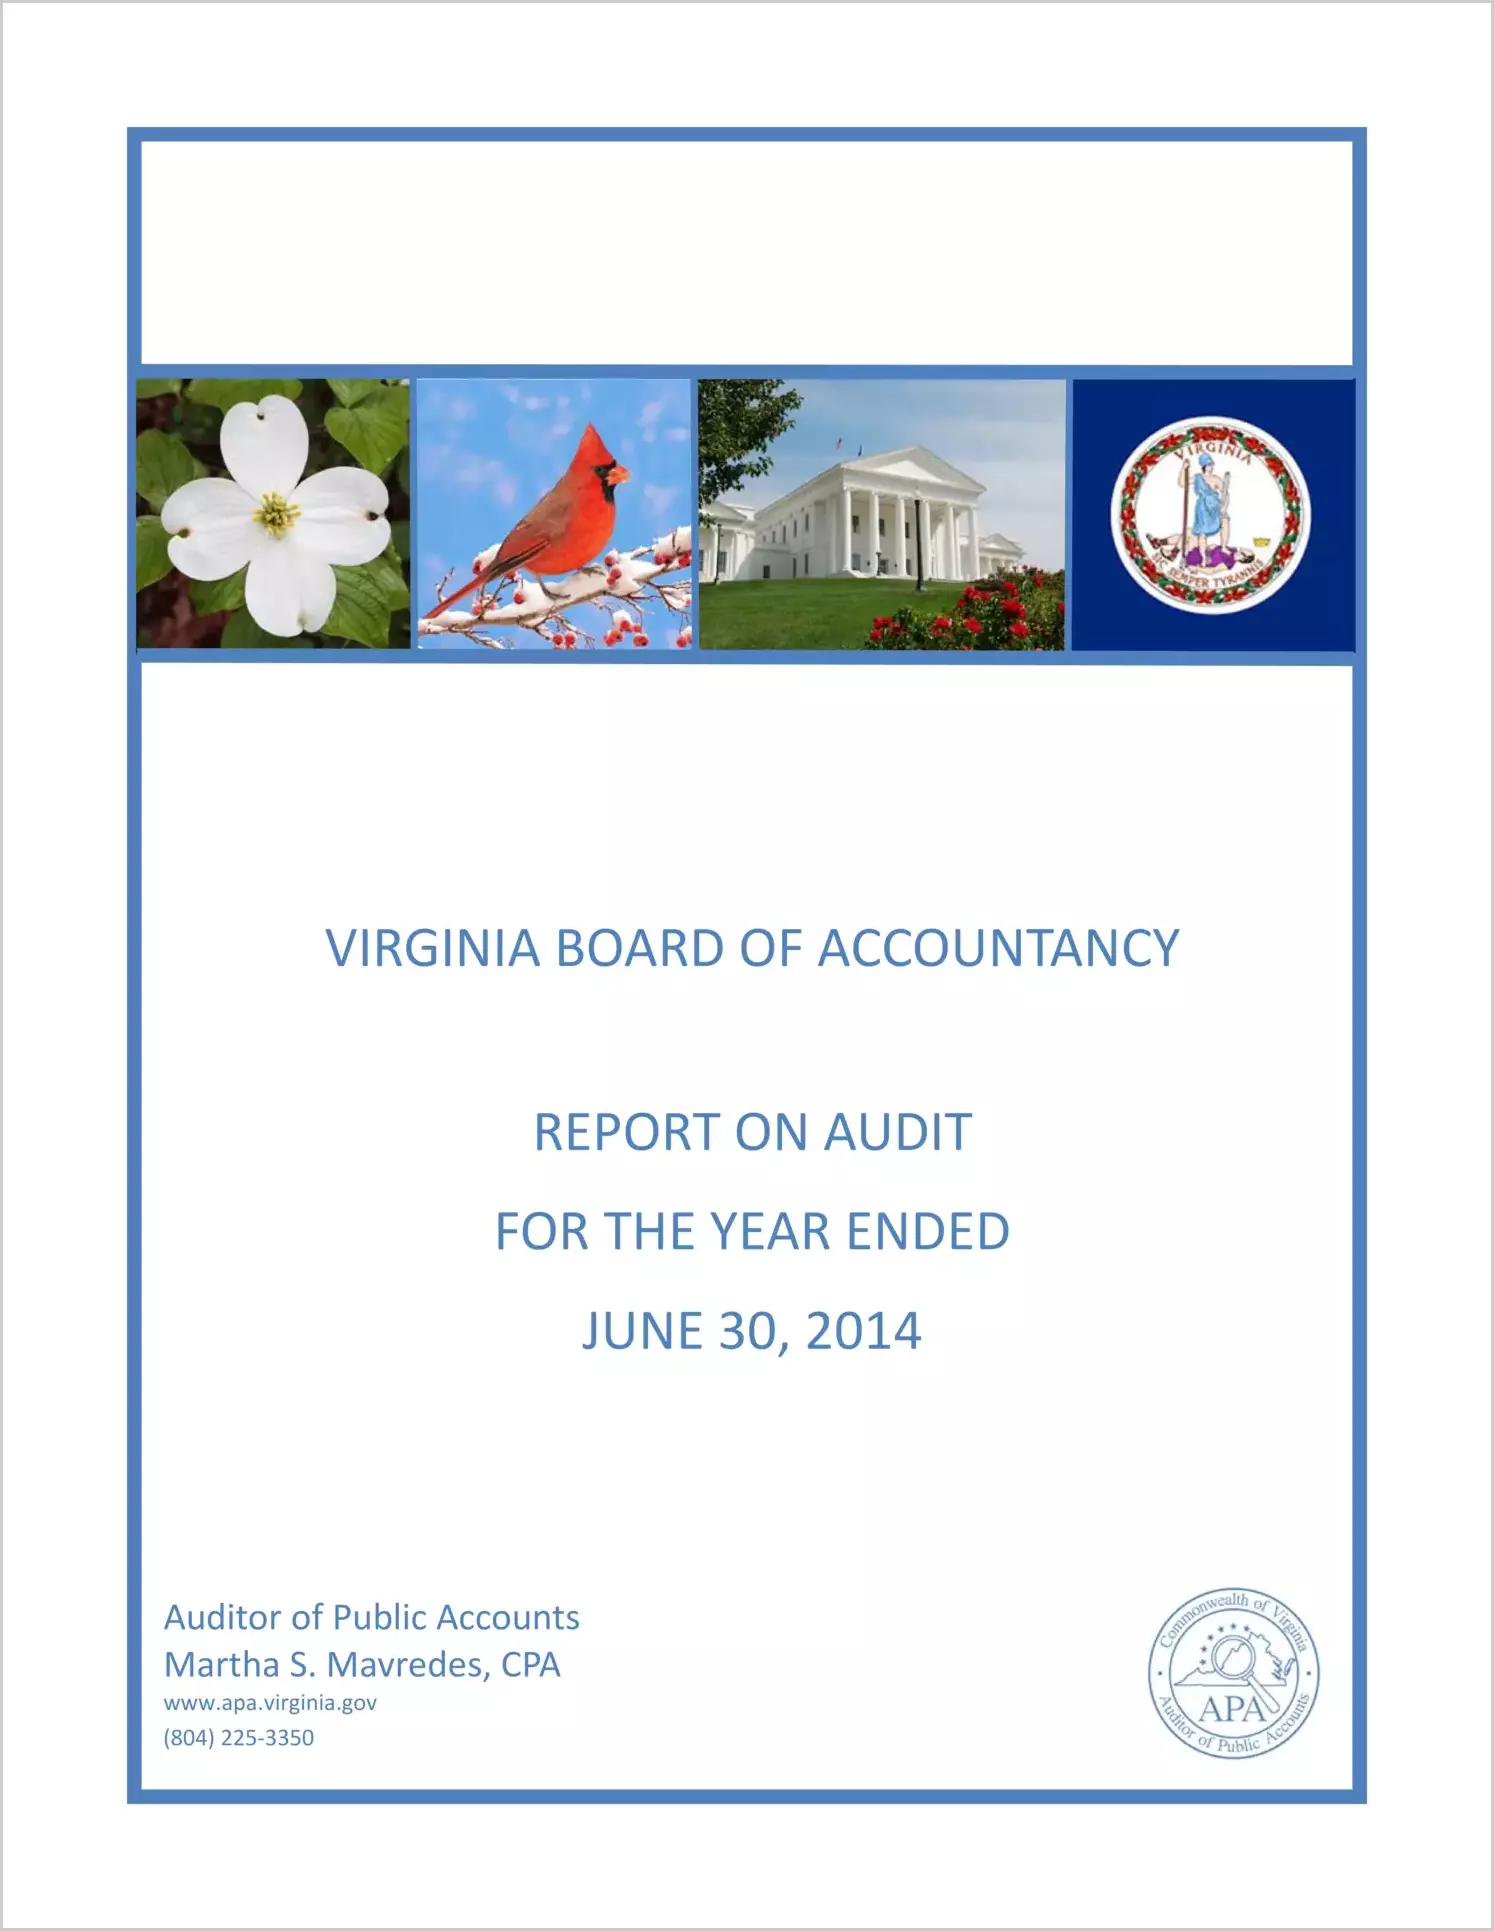 Virginia Board of Accountancy for the year ended June 30, 2014